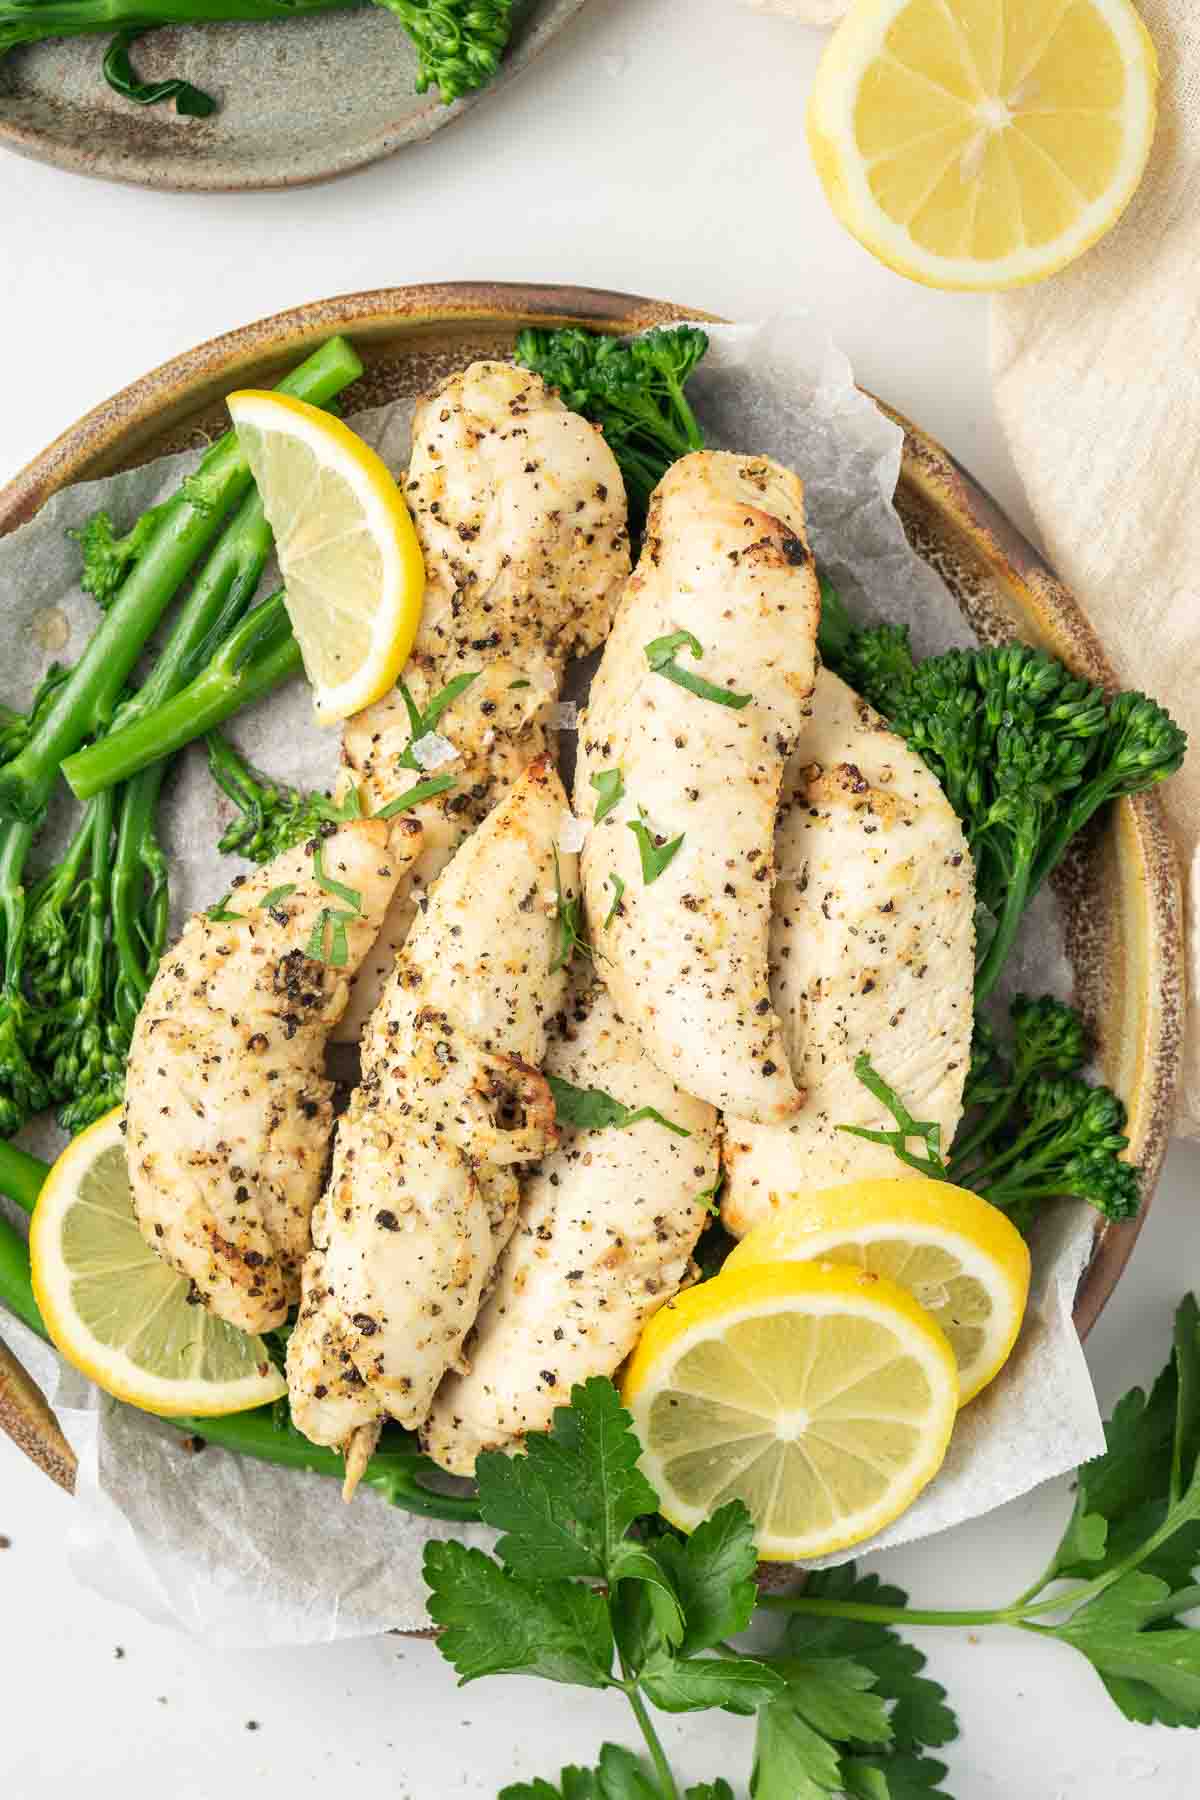 Chicken tenders with lemon and broccolini on a plate ready to serve.